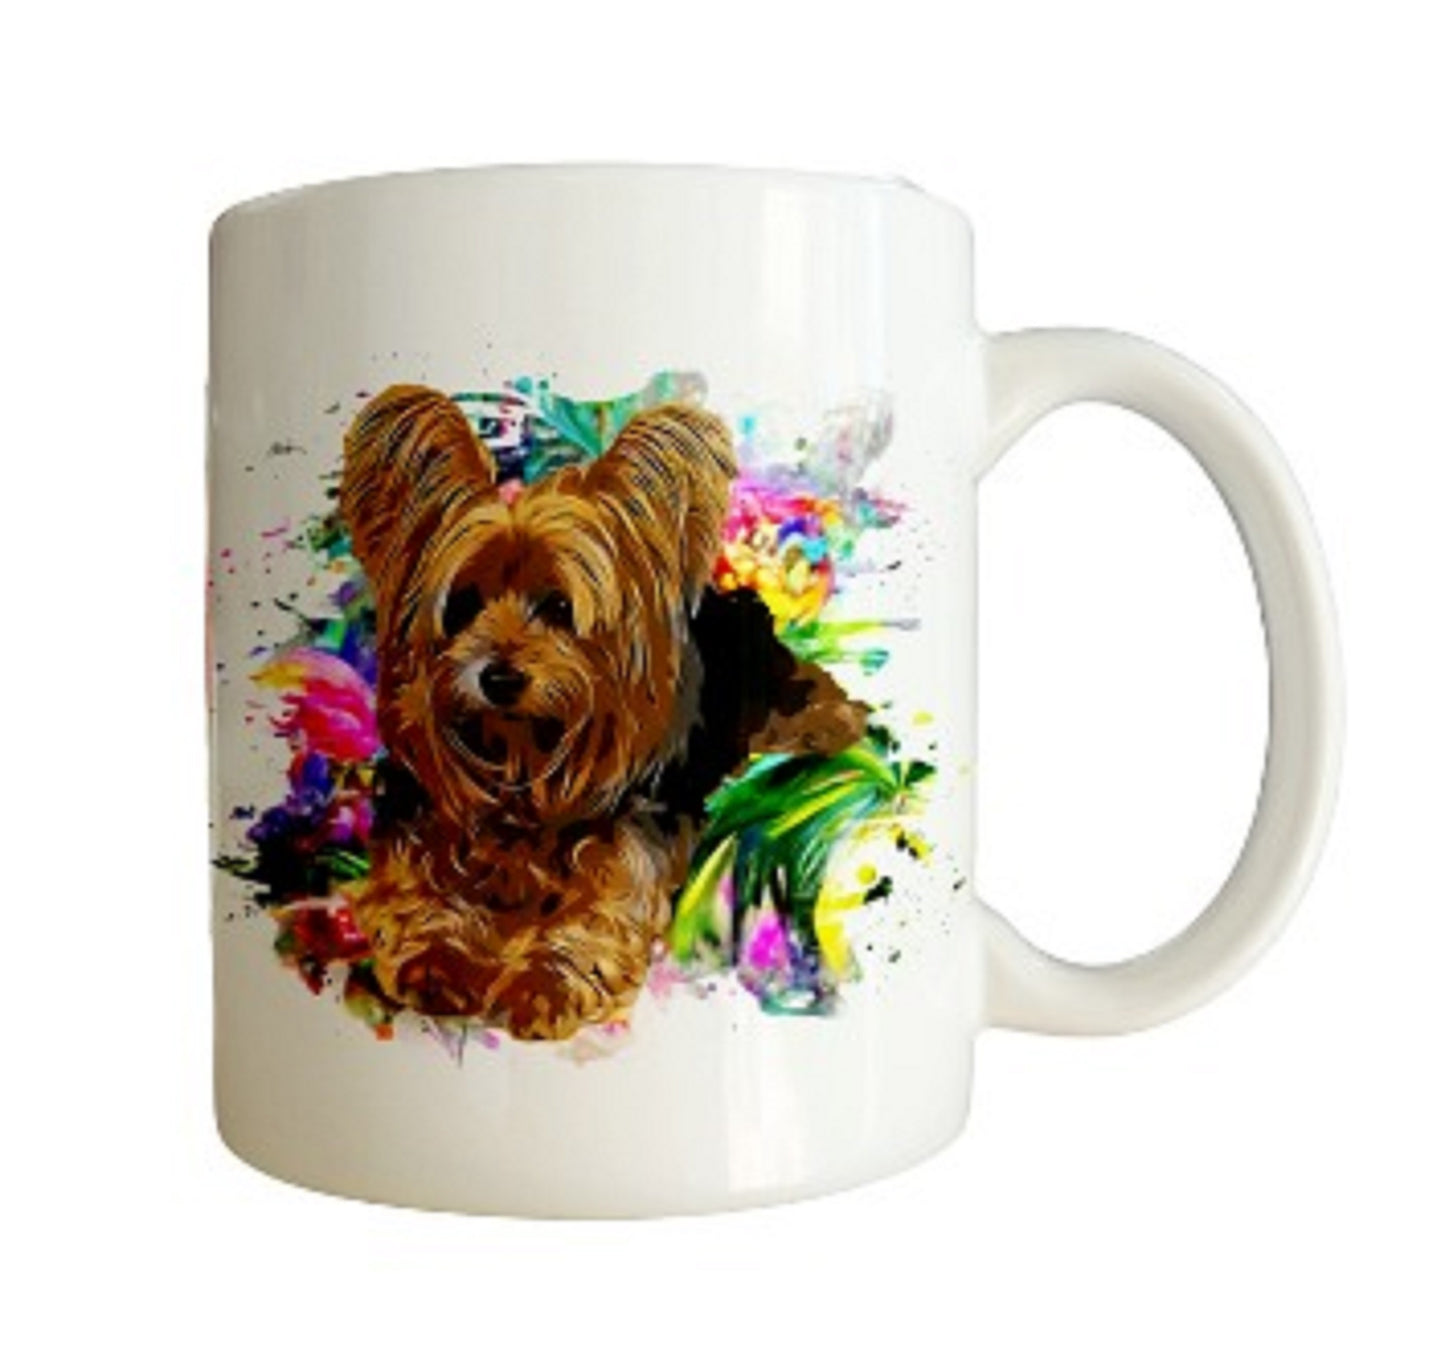  Colourful Yorkshire Terrier Dog Mug by Free Spirit Accessories sold by Free Spirit Accessories